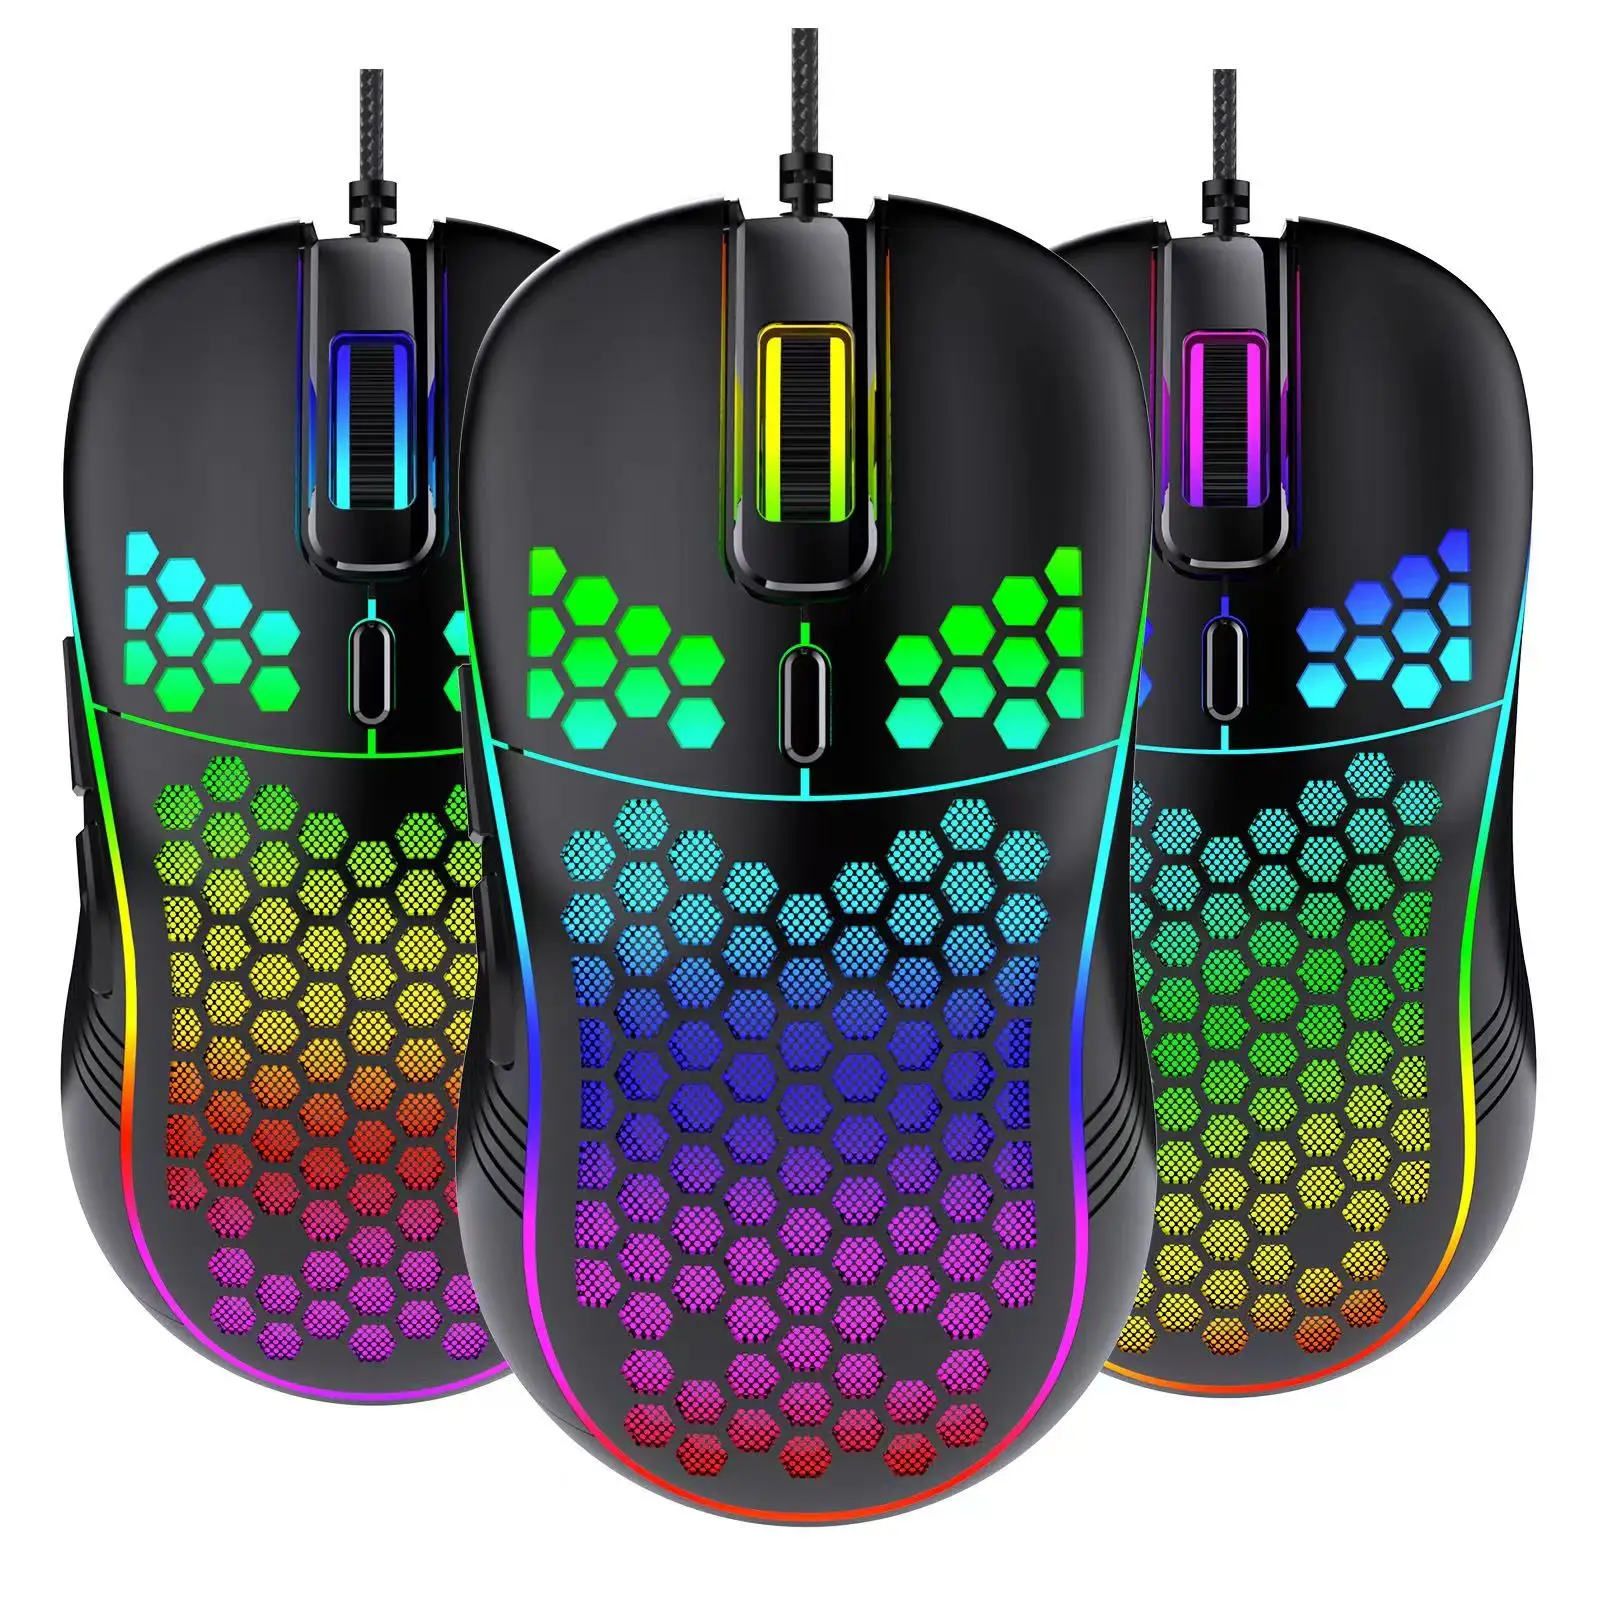 6D RGB Dazzling Ergonomic Wired Mouse The Perfect Choose Tool for Gaming Office Work